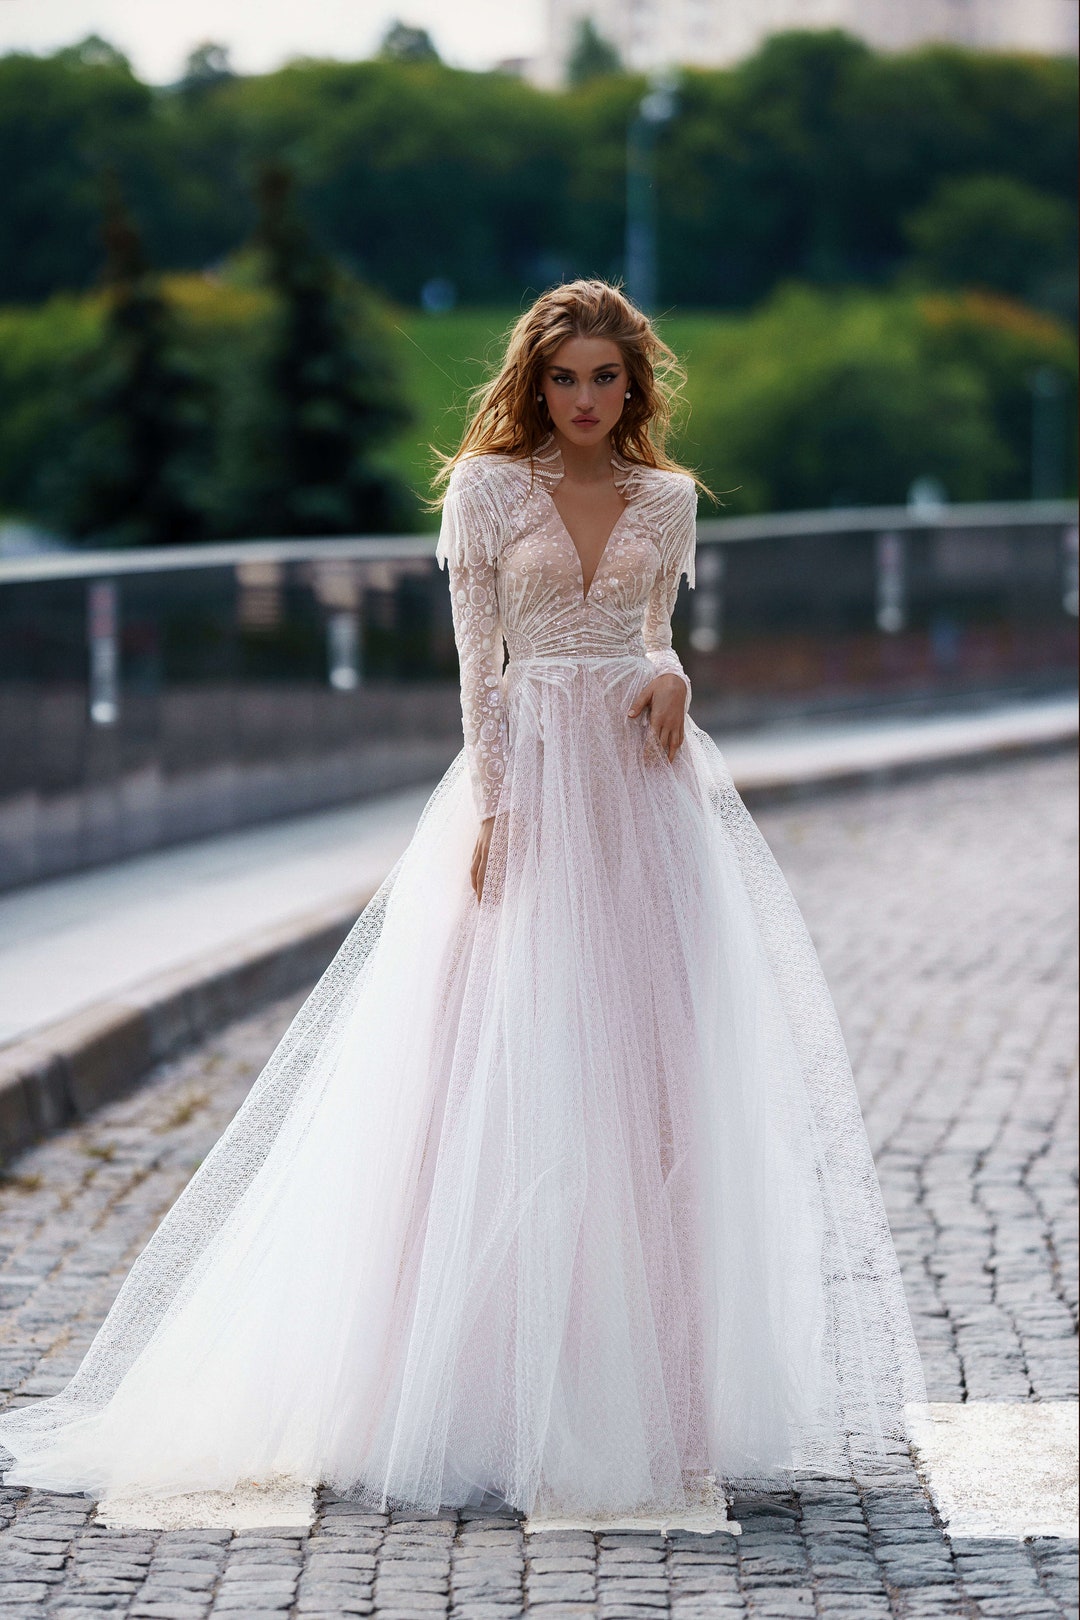 Lace And Tulle Wedding Dress//november/ Blush-nude Wedding, 42% OFF